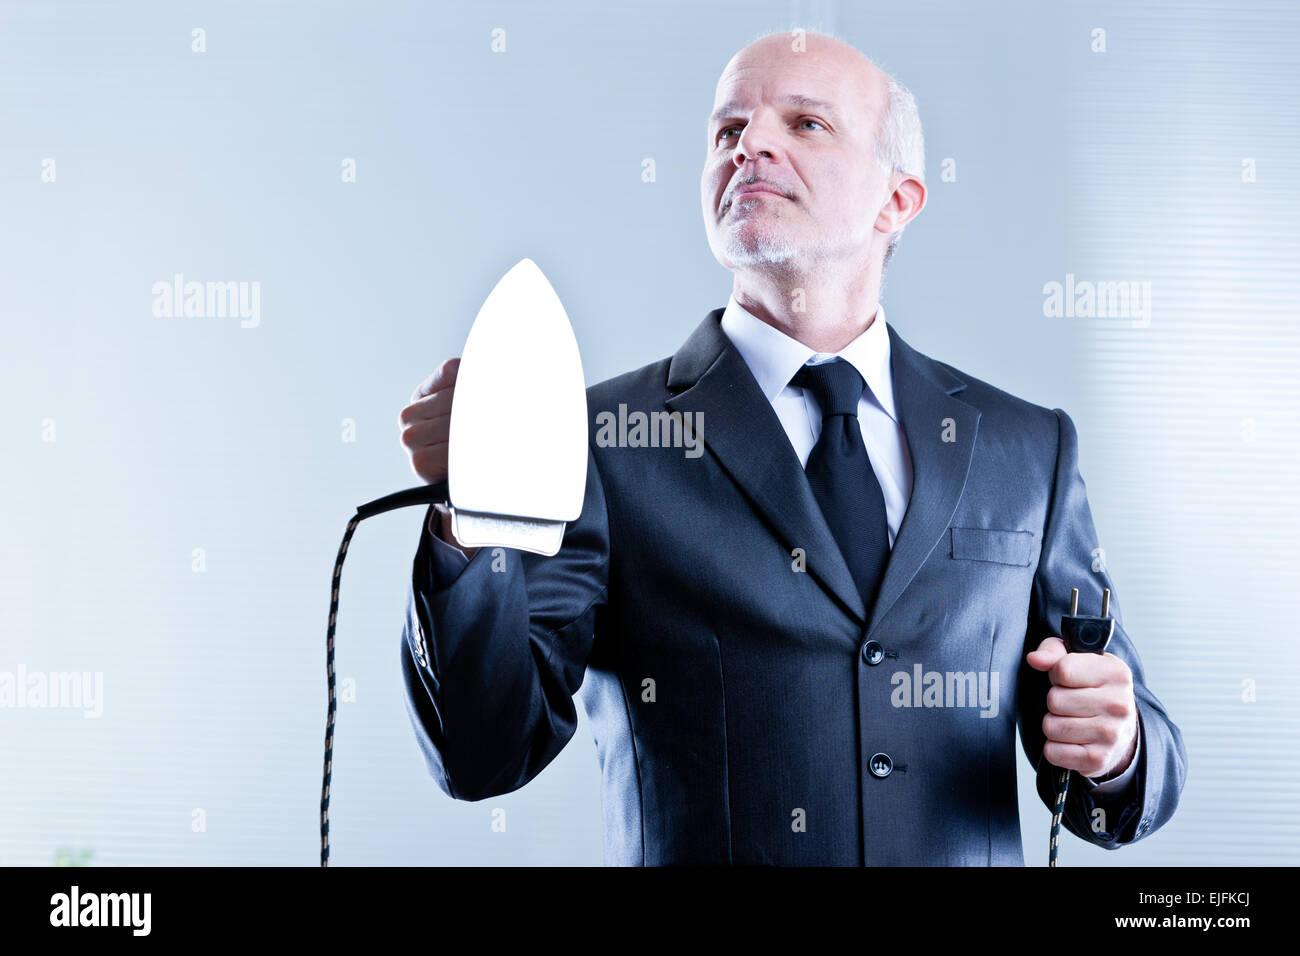 Business man holding and rising an Iron in his hands Stock Photo